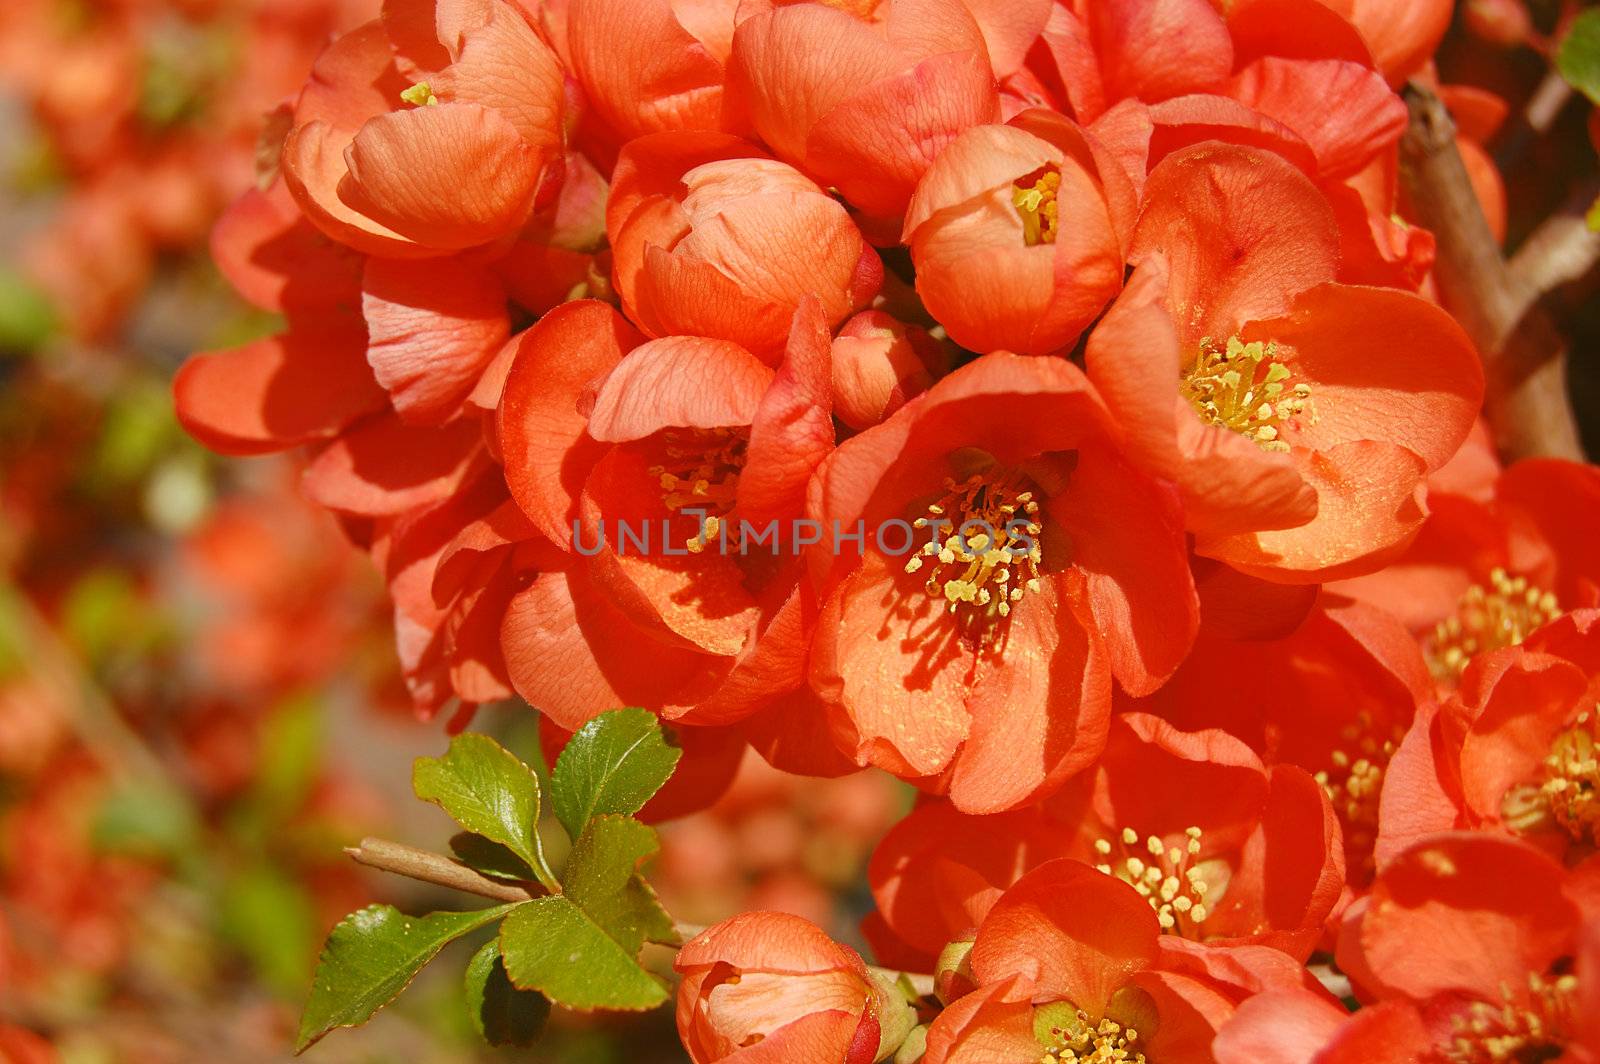 Blooming quince by Angel_a